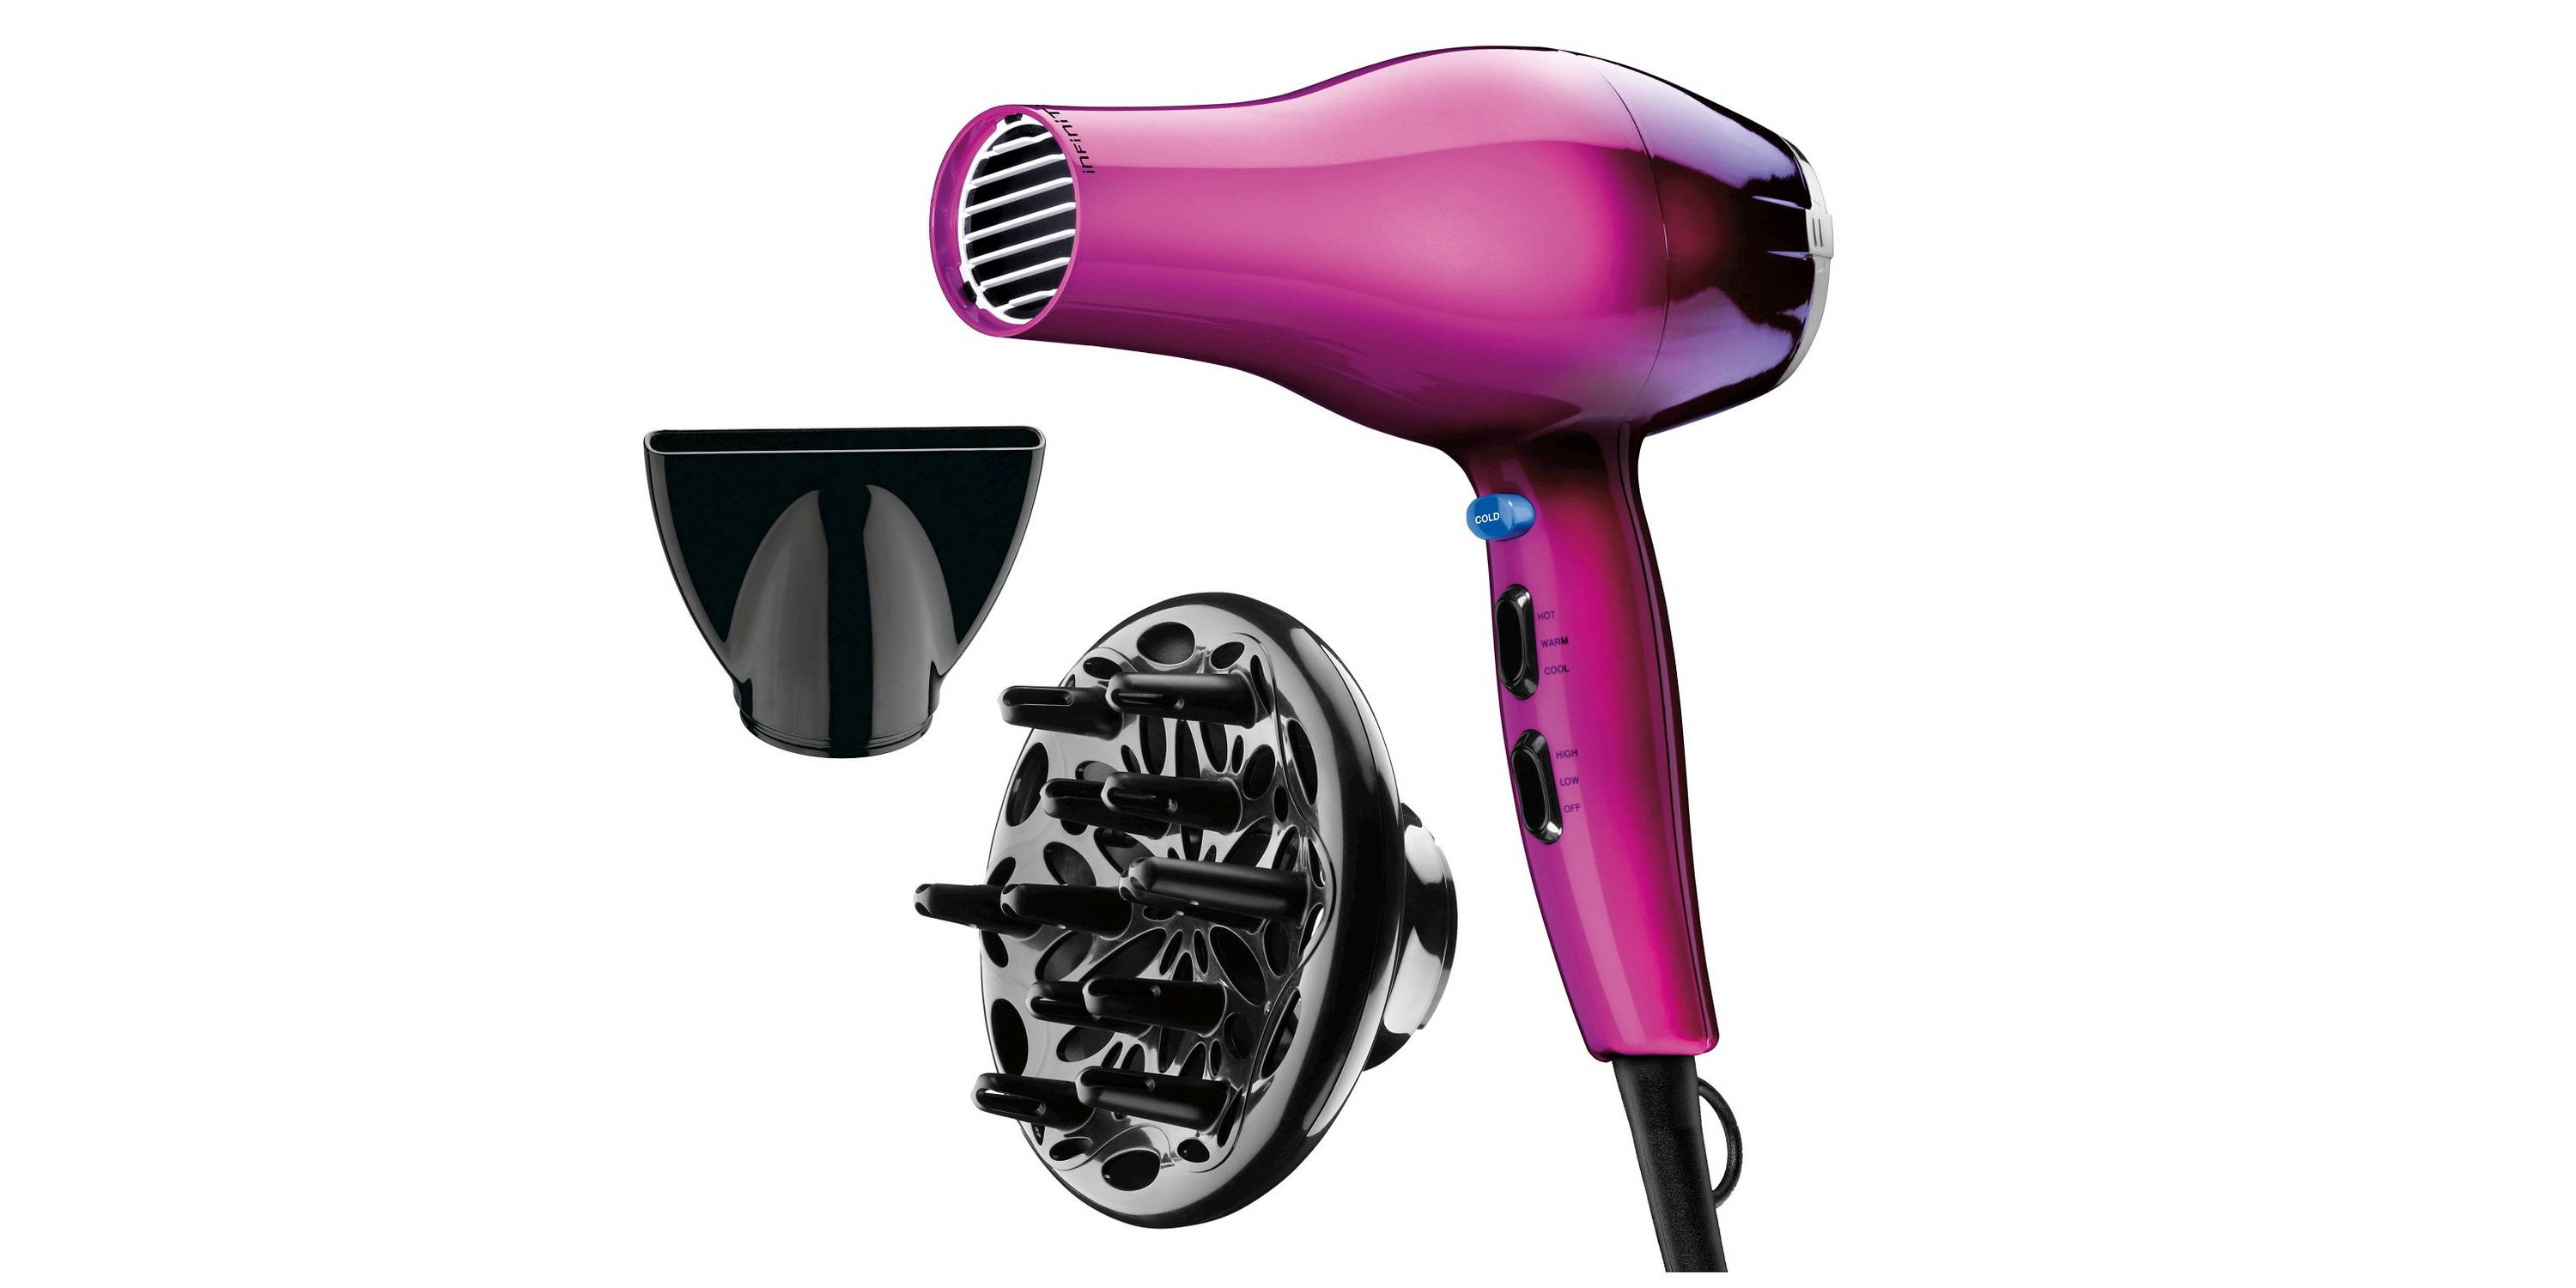 Conair Infiniti Pro Hair Dryer in Ombre Finish—$29.74 + $5 Gift Card!